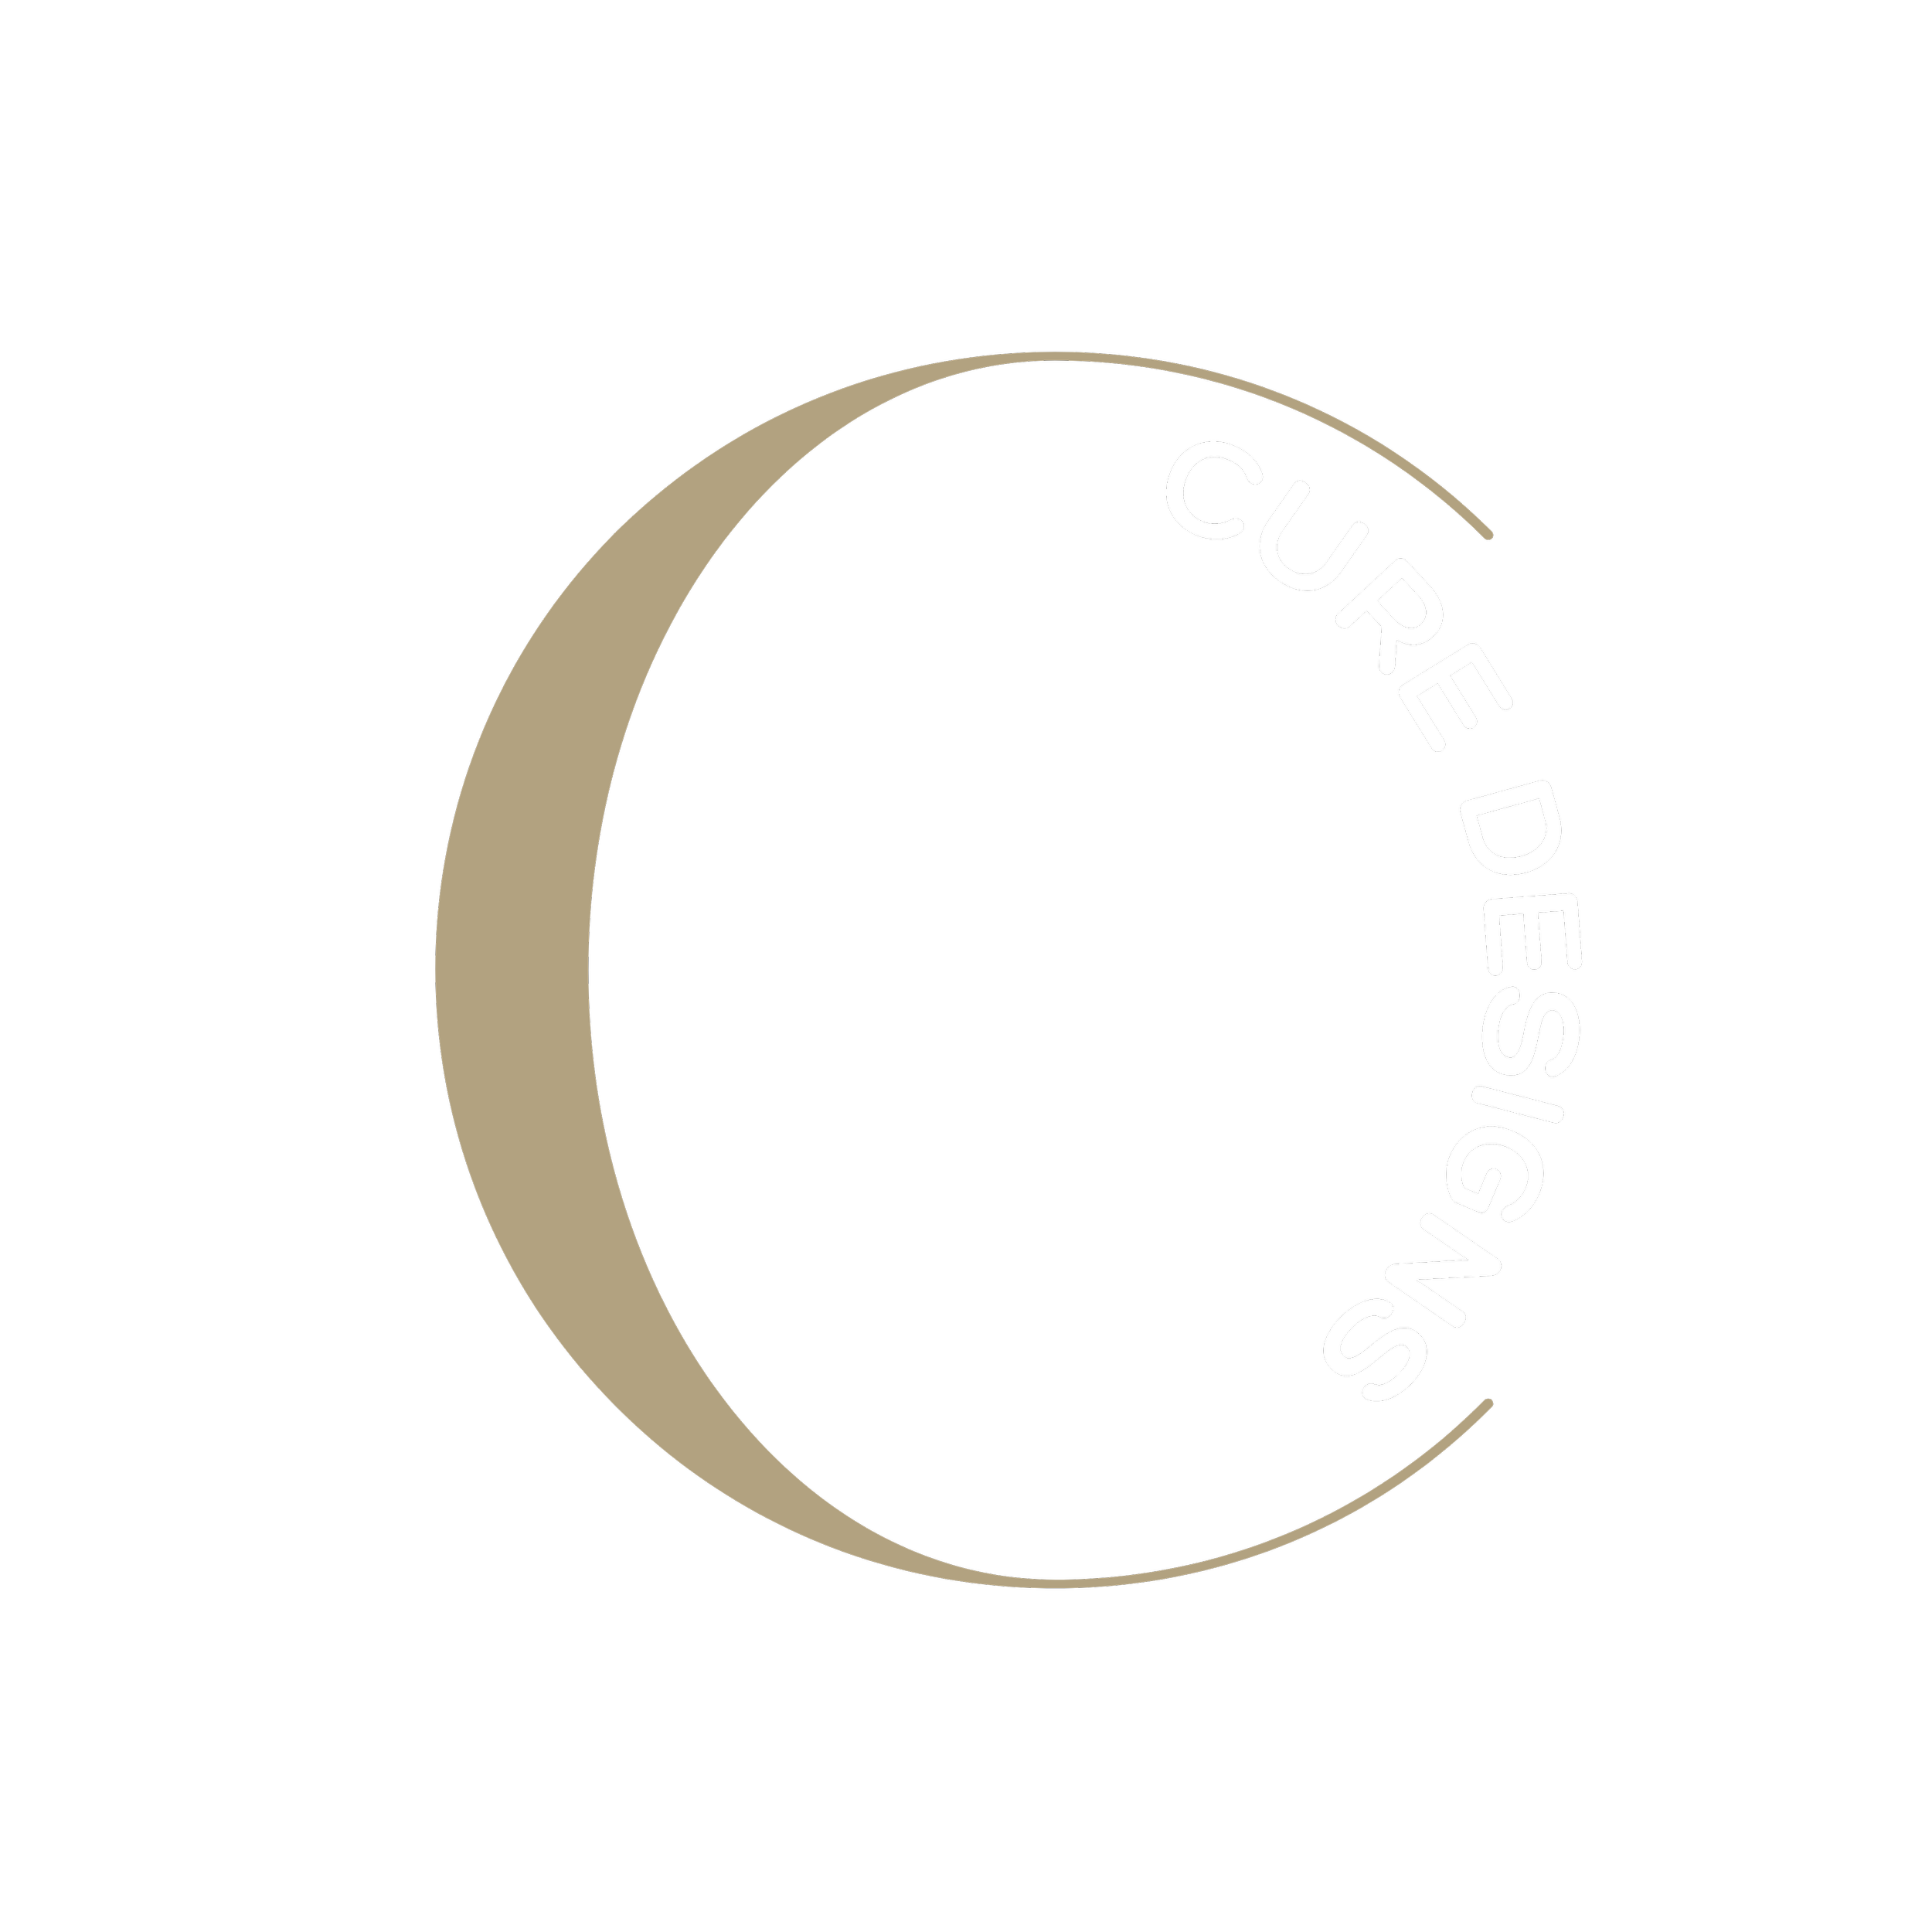 About — Cure Designs